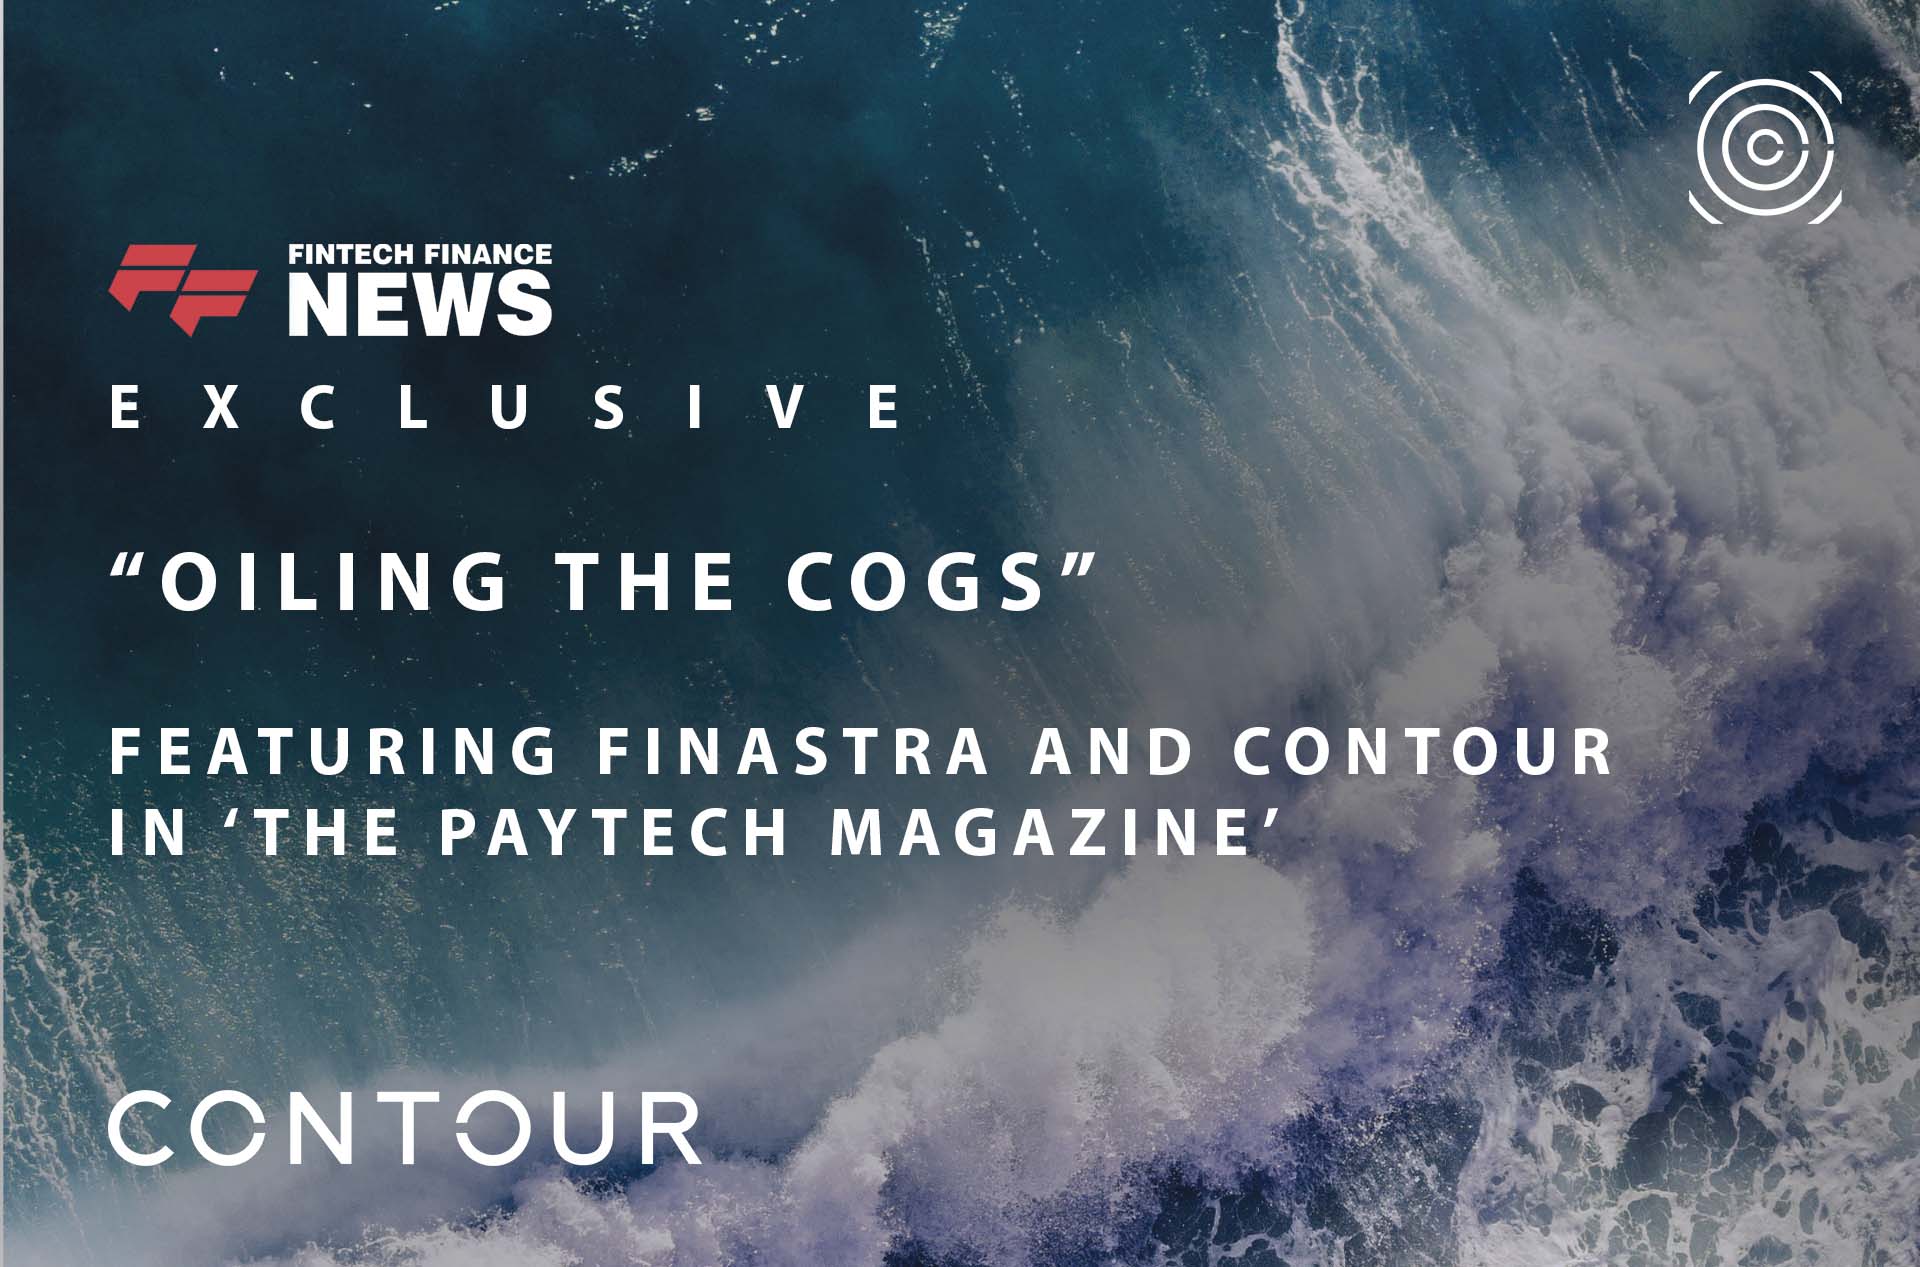 EXCLUSIVE: “Oiling the Cogs” - Featuring Finastra and Contour in ‘The Paytech Magazine’